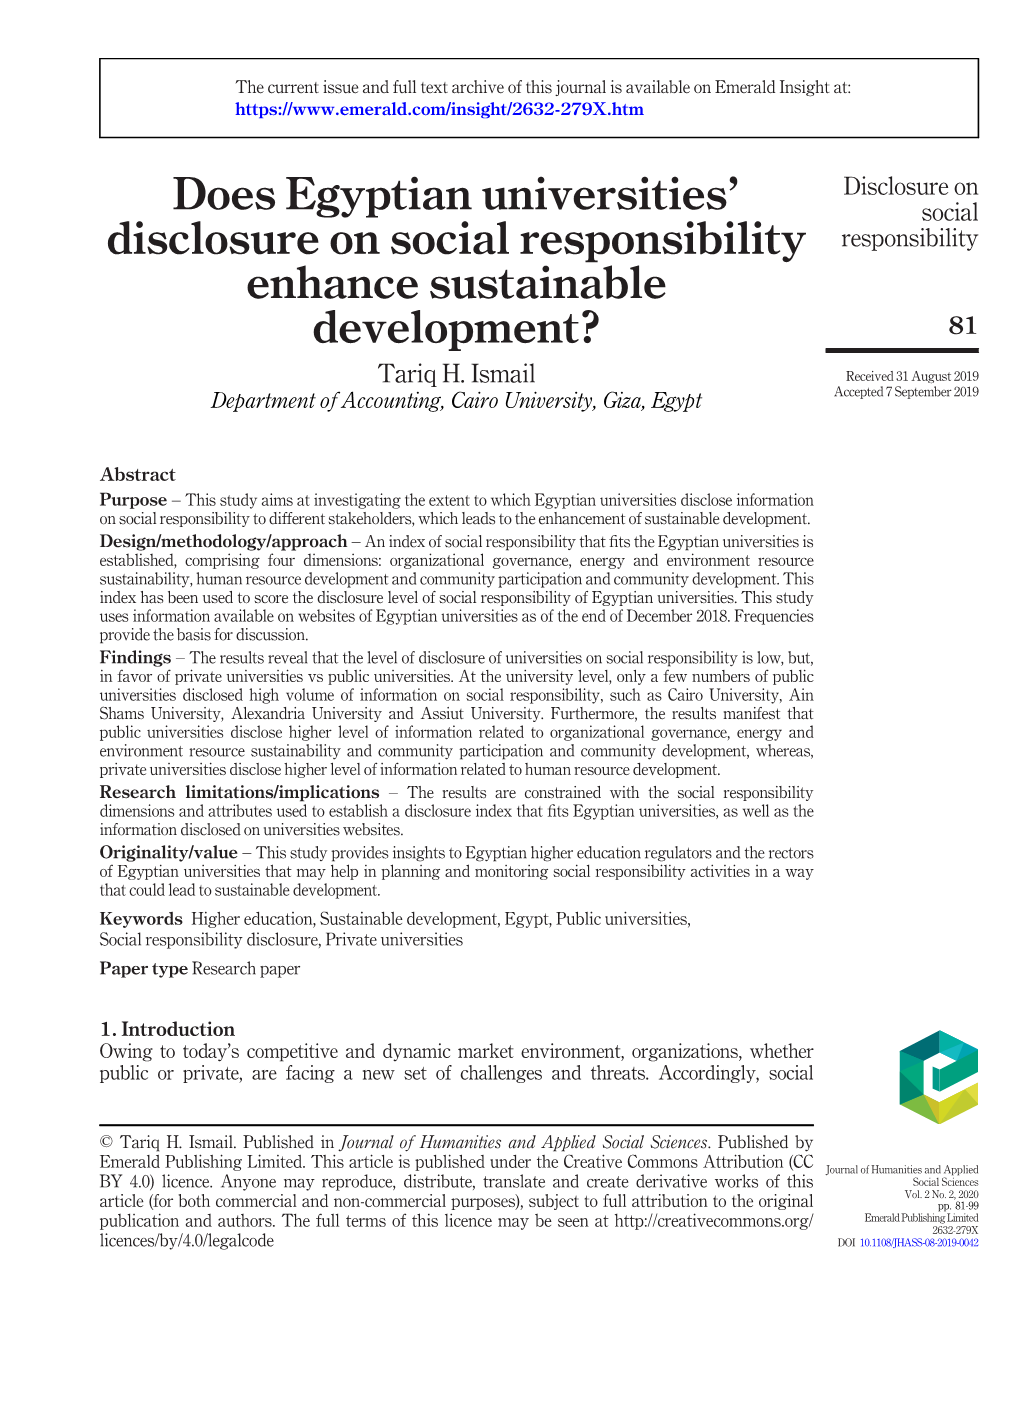 Does Egyptian Universities' Disclosure on Social Responsibility Enhance Sustainable Development?